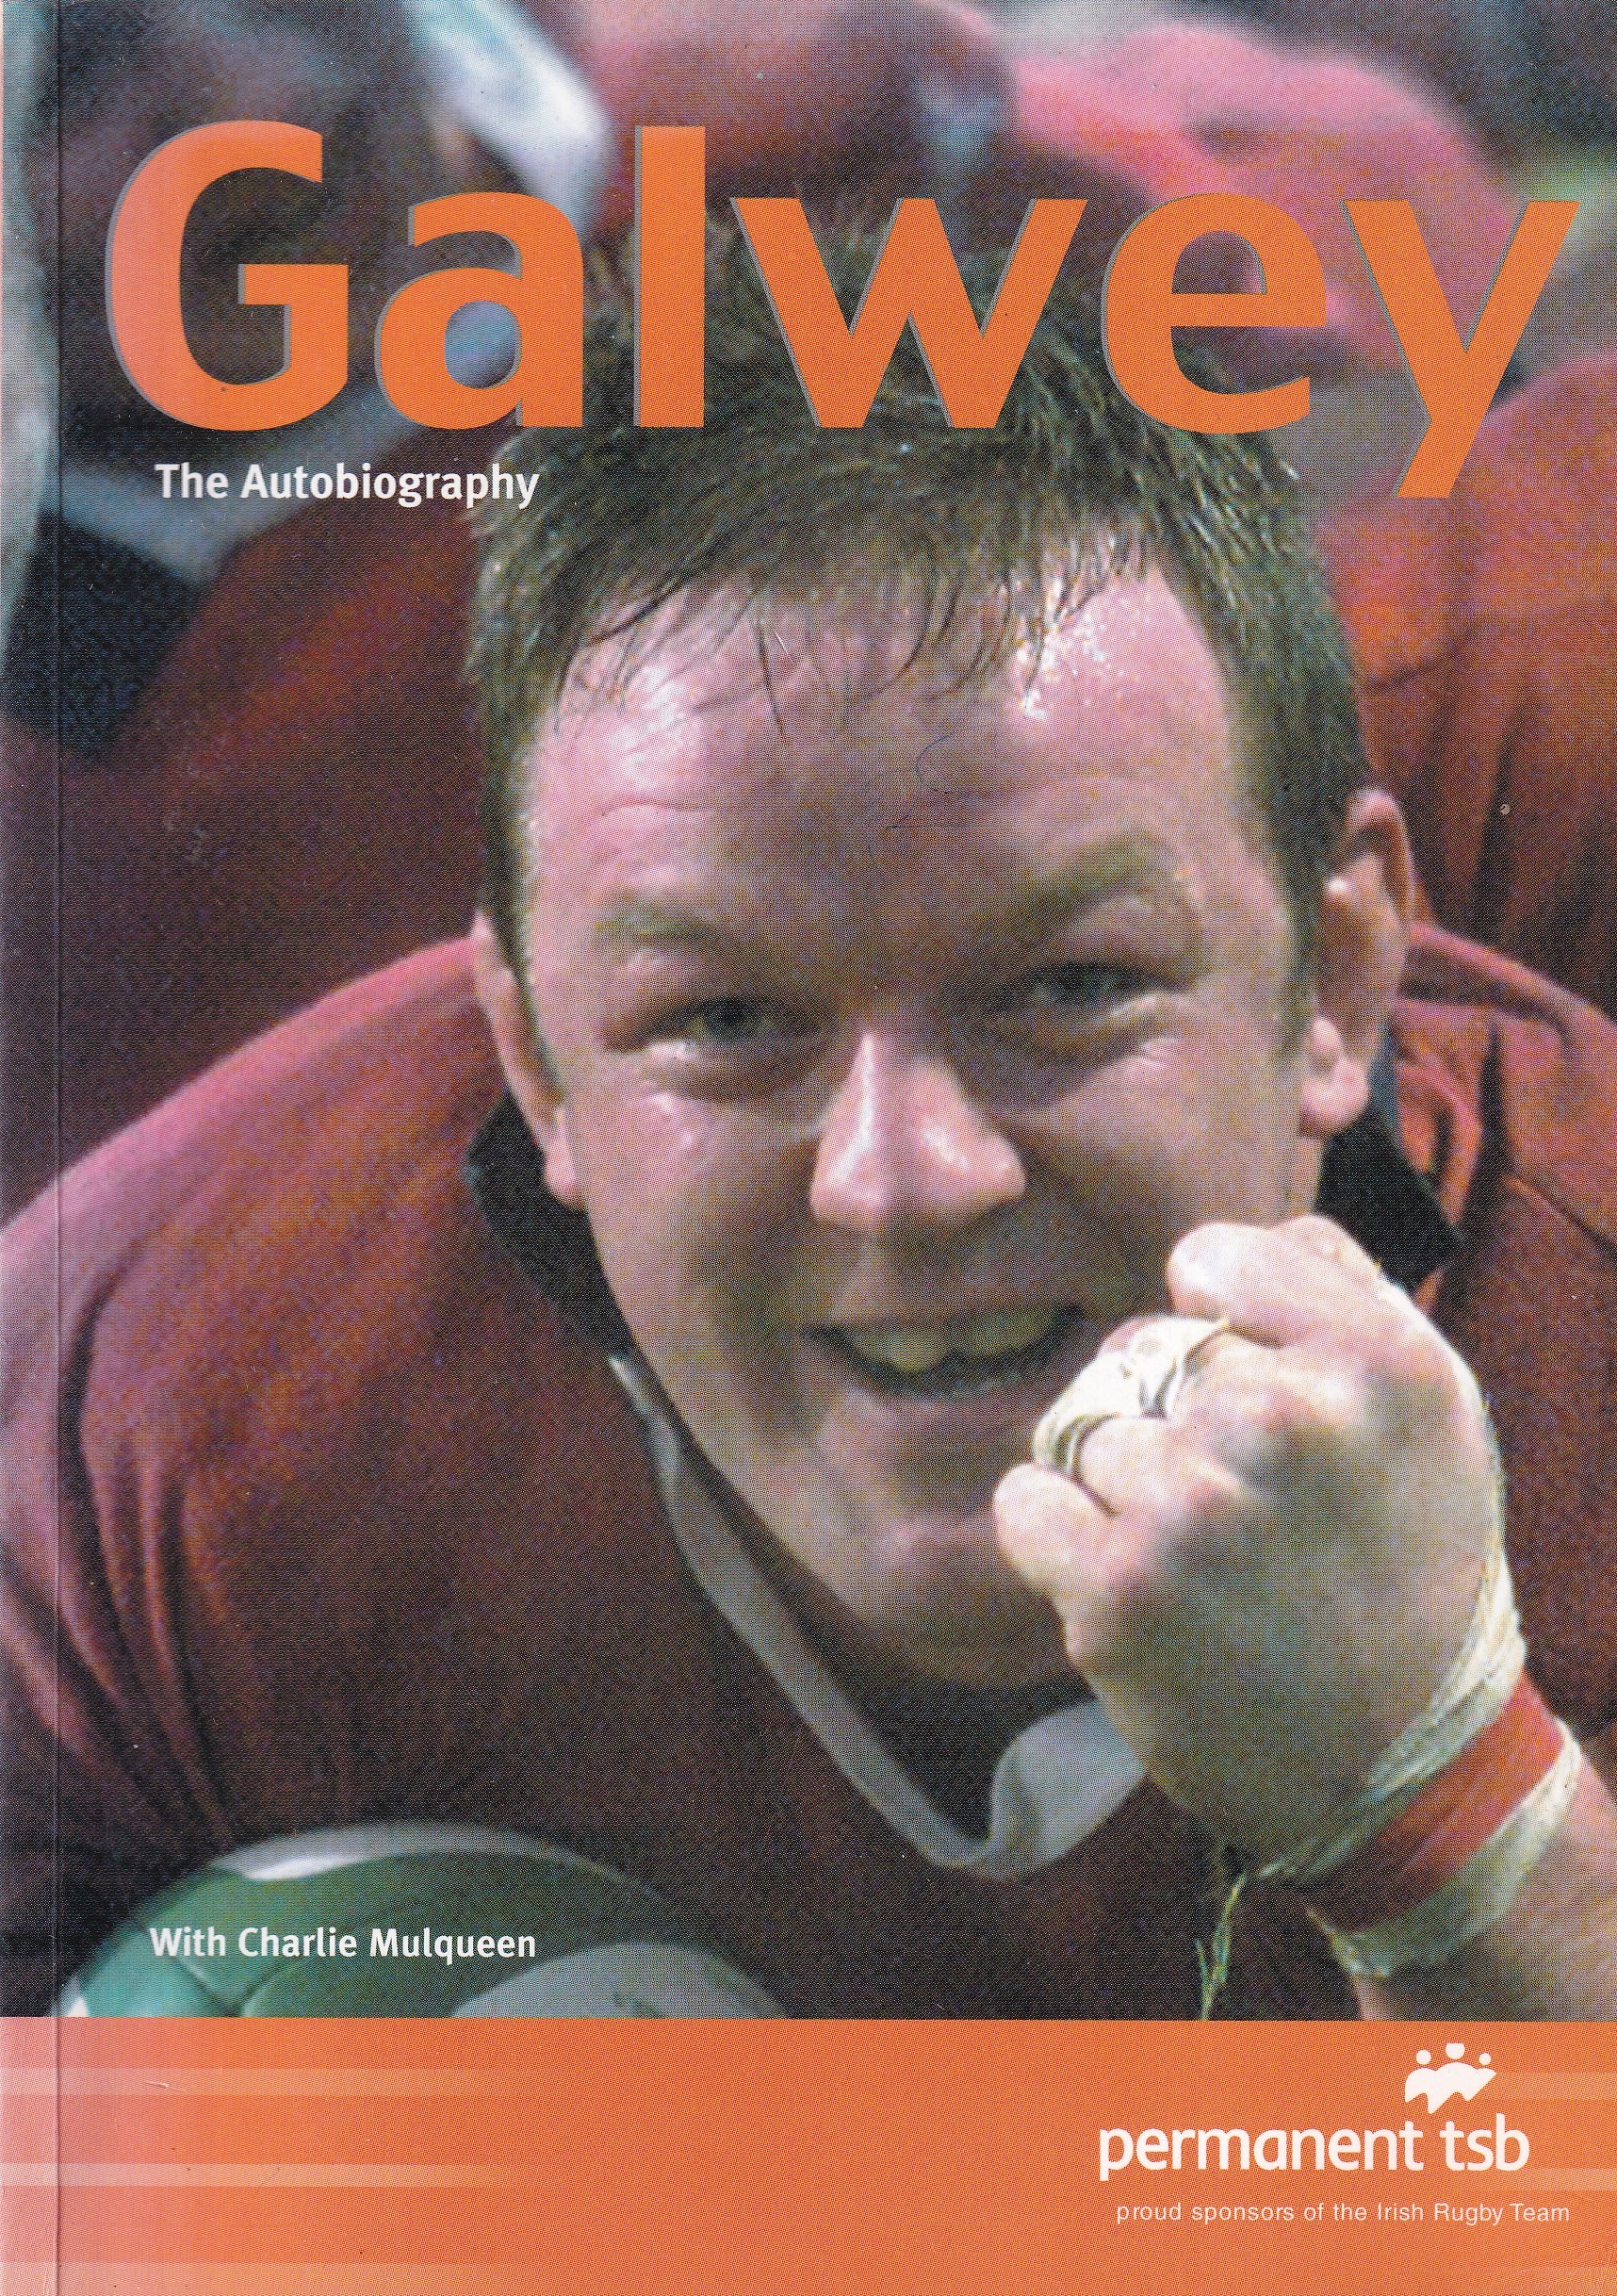 Galwey – The Autobiography | Charlie Mulqueen, with Mick Galwey | Charlie Byrne's